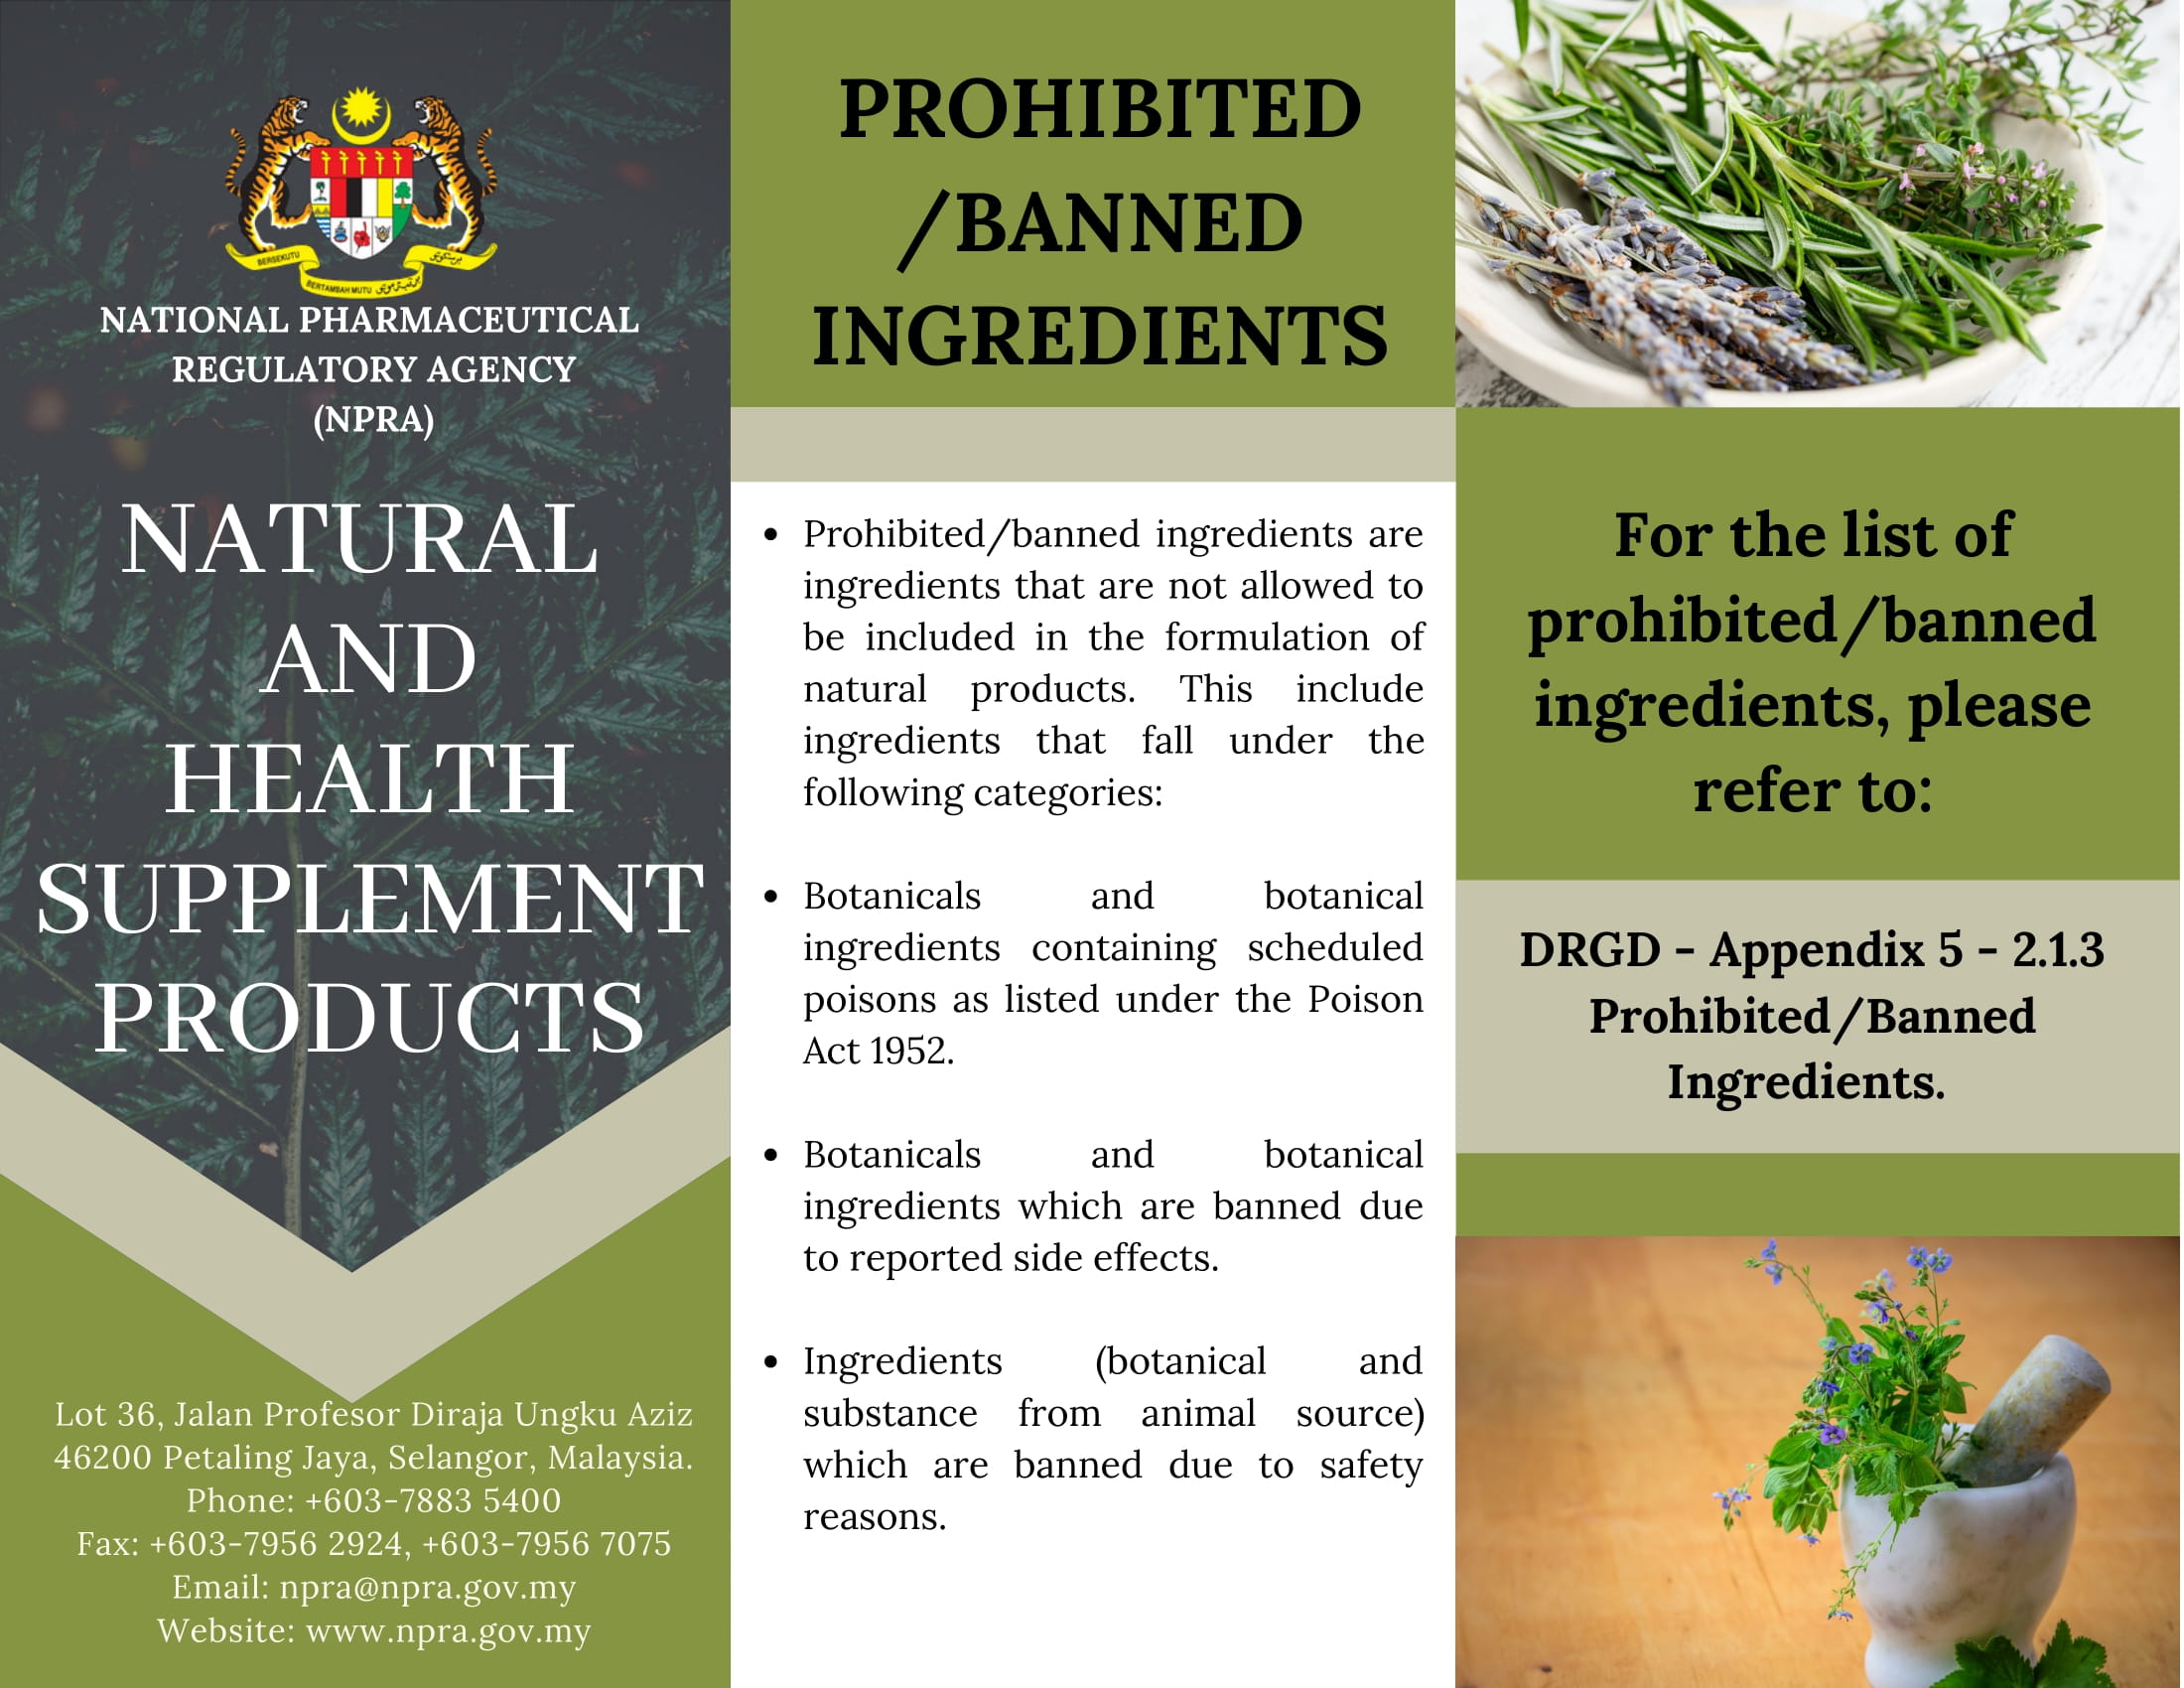 Natural & Health Supplement Products - Prohibited/Banned Ingredients